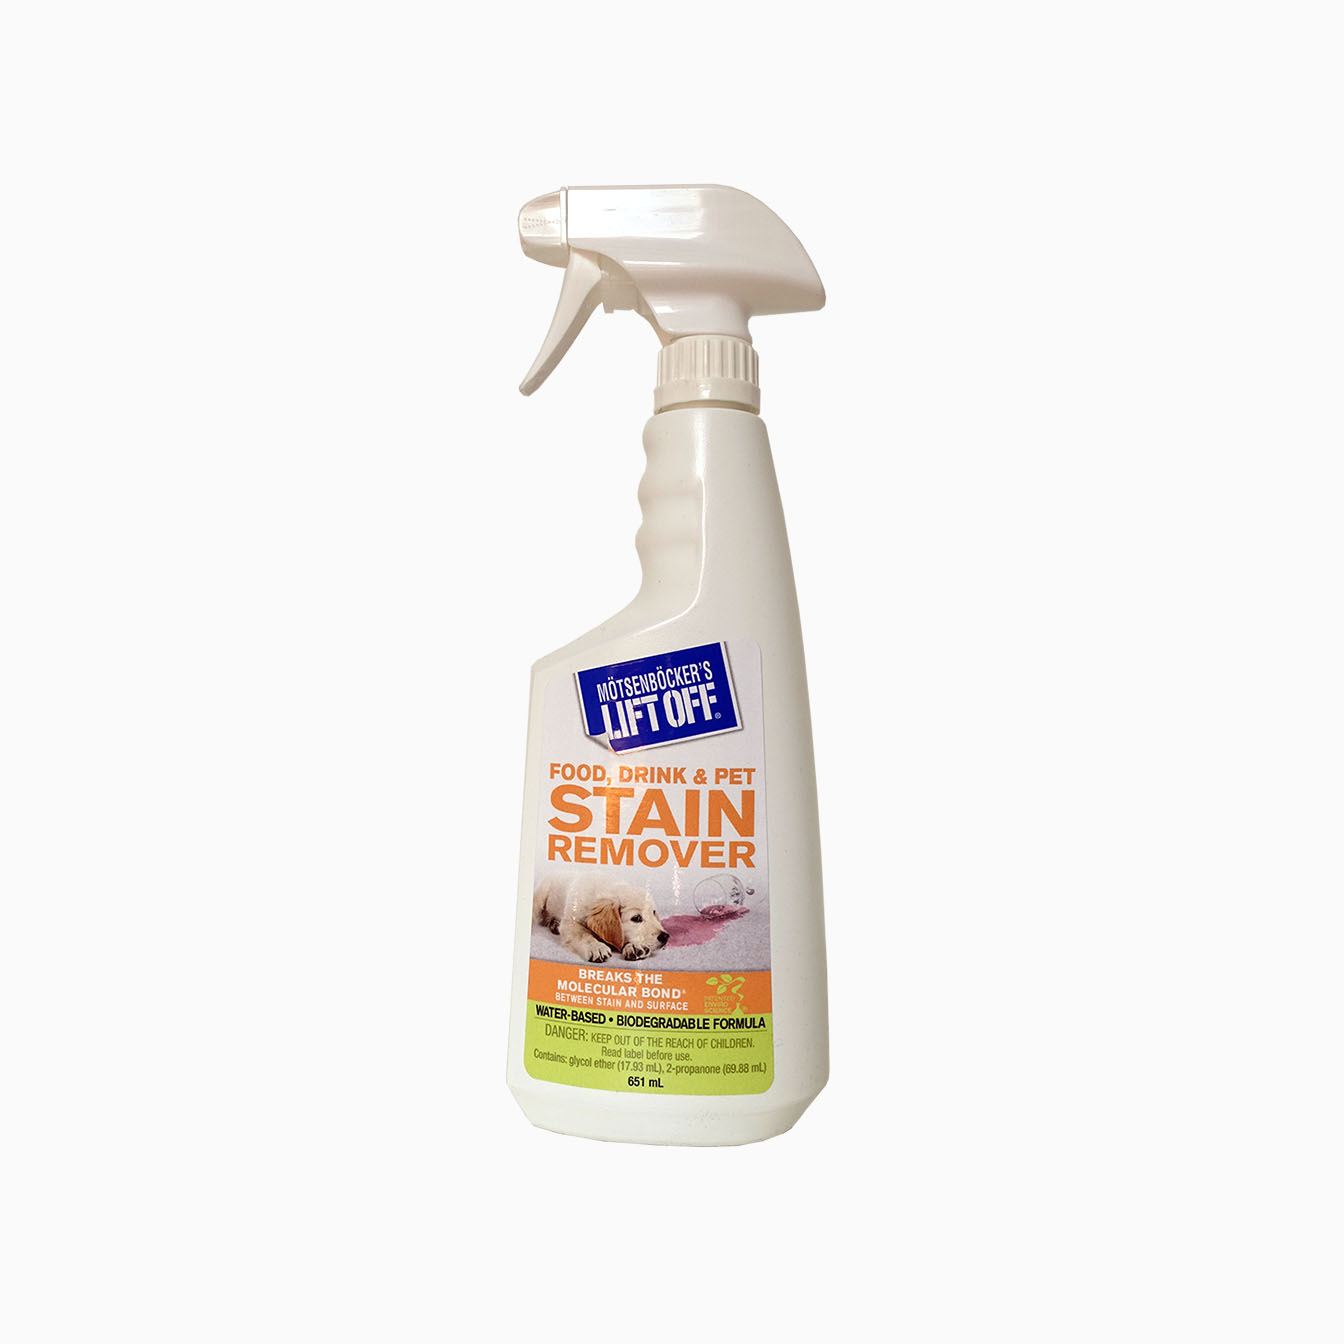 Mötsenböcker’s Lift Off® Food, Drink and Pet Stain Remover (651ml)